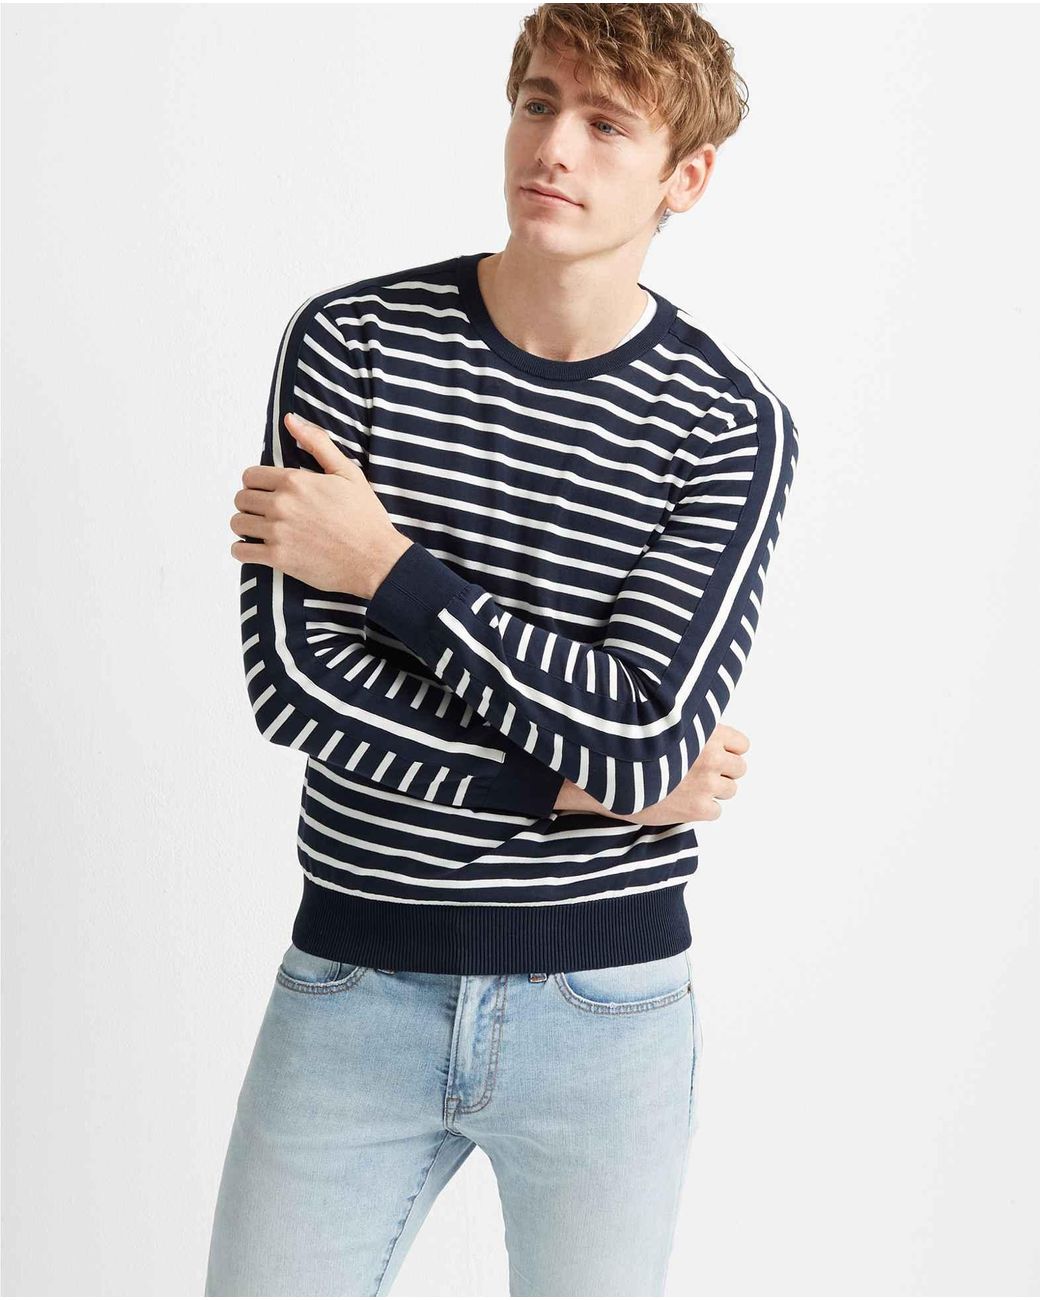 Club Monaco Striped Cotton Sweater in Navy/White (Blue) for Men - Save ...